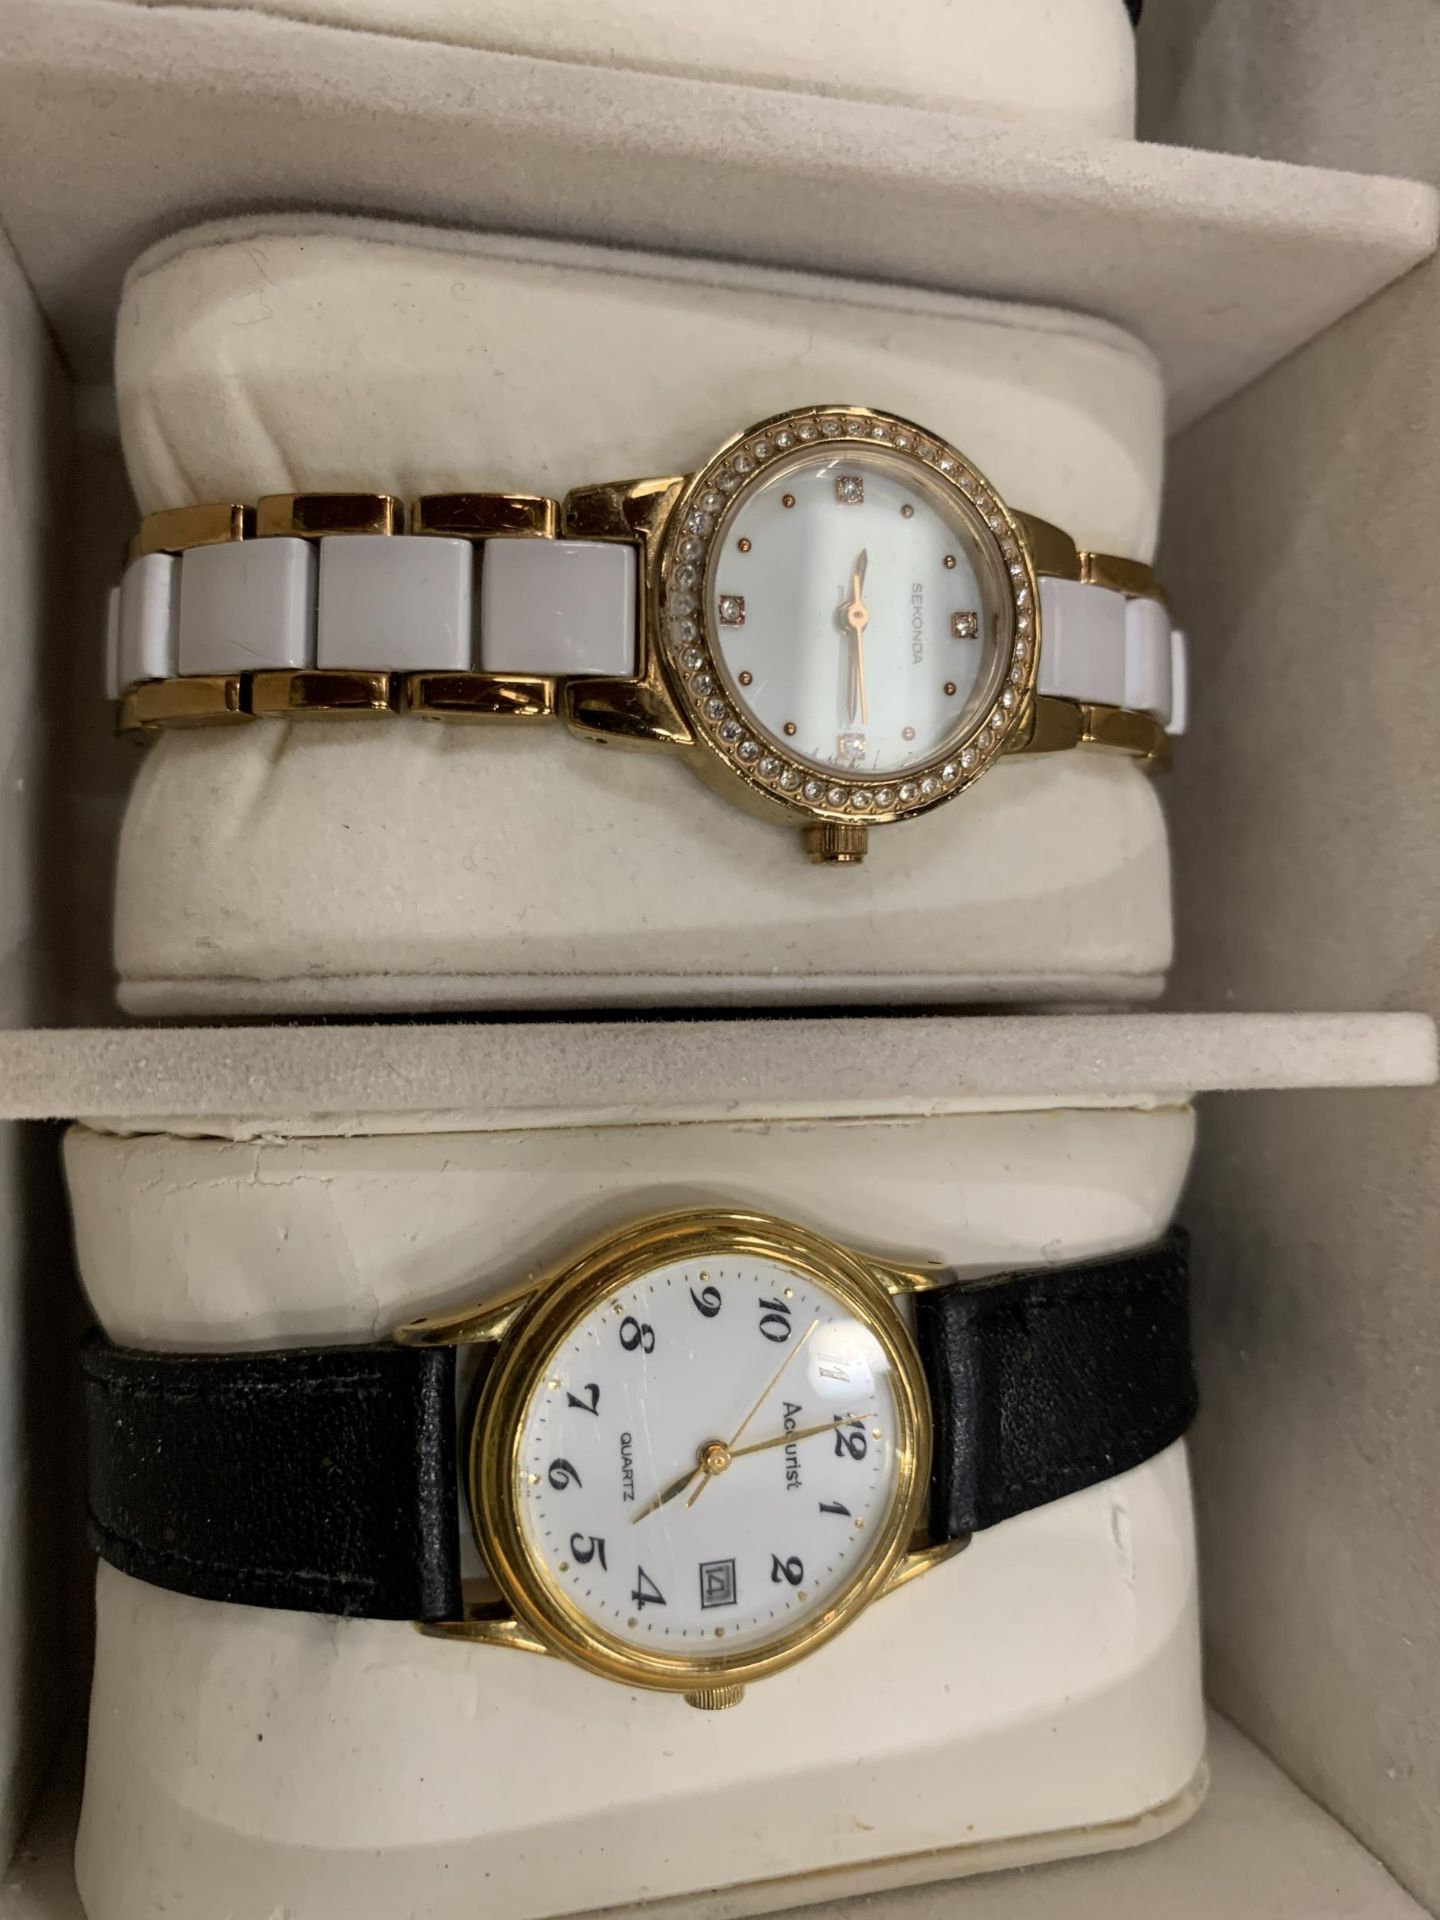 FIVE LADIES WRISTWATCHES IN A WOODEN CASE - Image 2 of 6